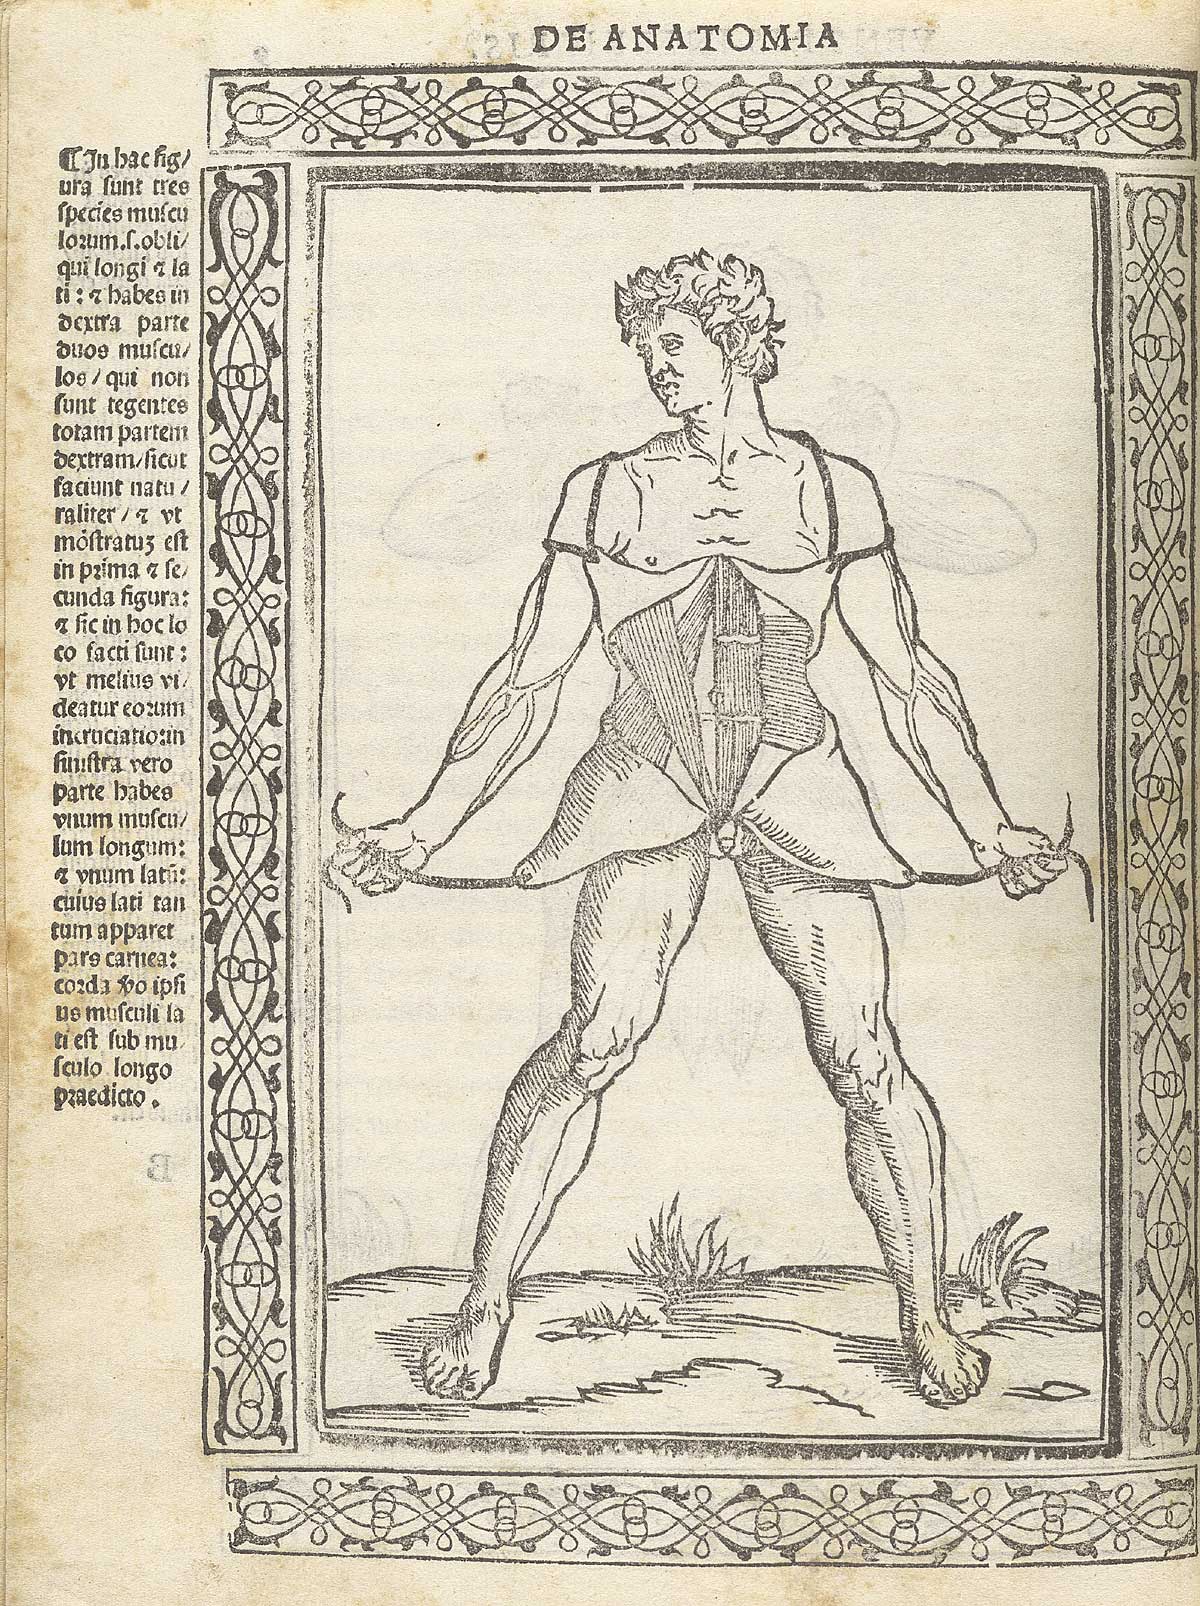 Woodcut of male anatomical figure pulling the skin away to his sides to give a view of his abdominal muscles, with a woodcut border and text in Latin on the left side of page, from Berengario da Carpi’s Isagogae breues, Bologna, 1523, NLM Call no. WZ 240 B488i 1523.